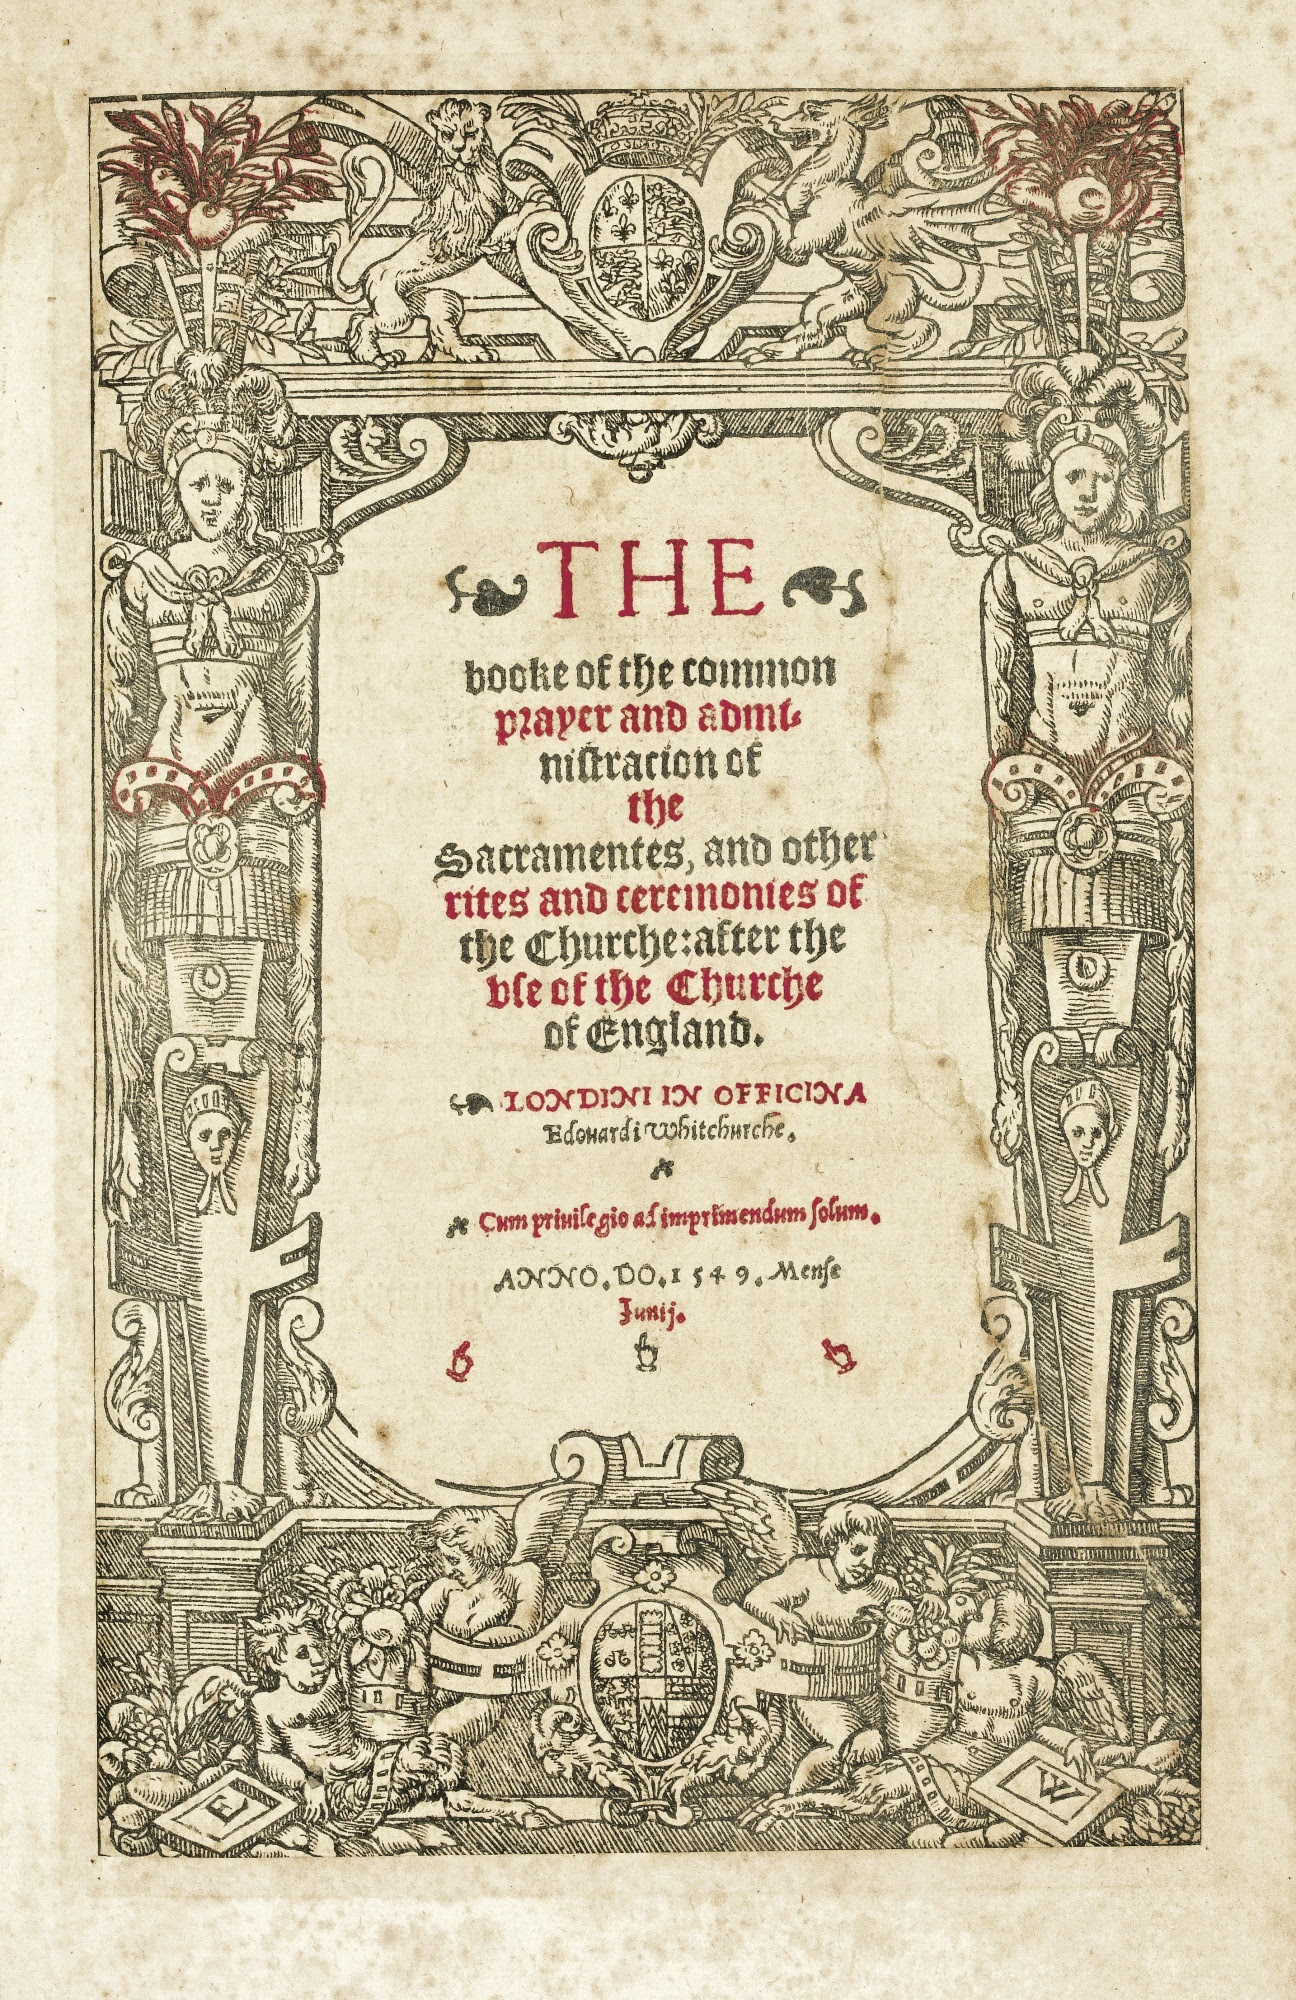 The front page of the 1549 prayer book